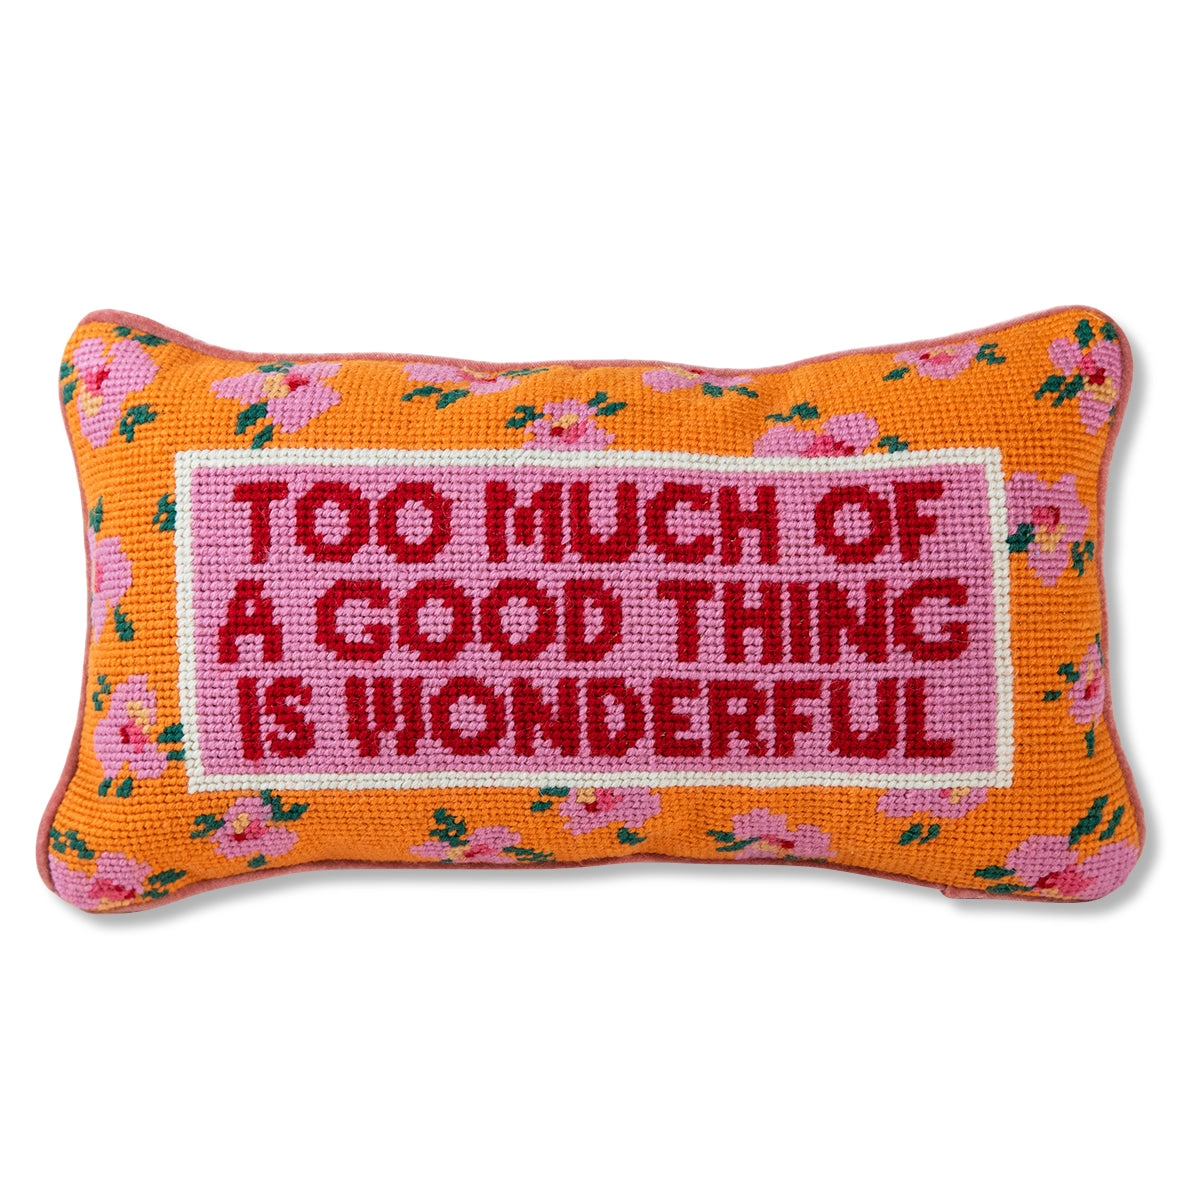 Good thing needlepoint pillow